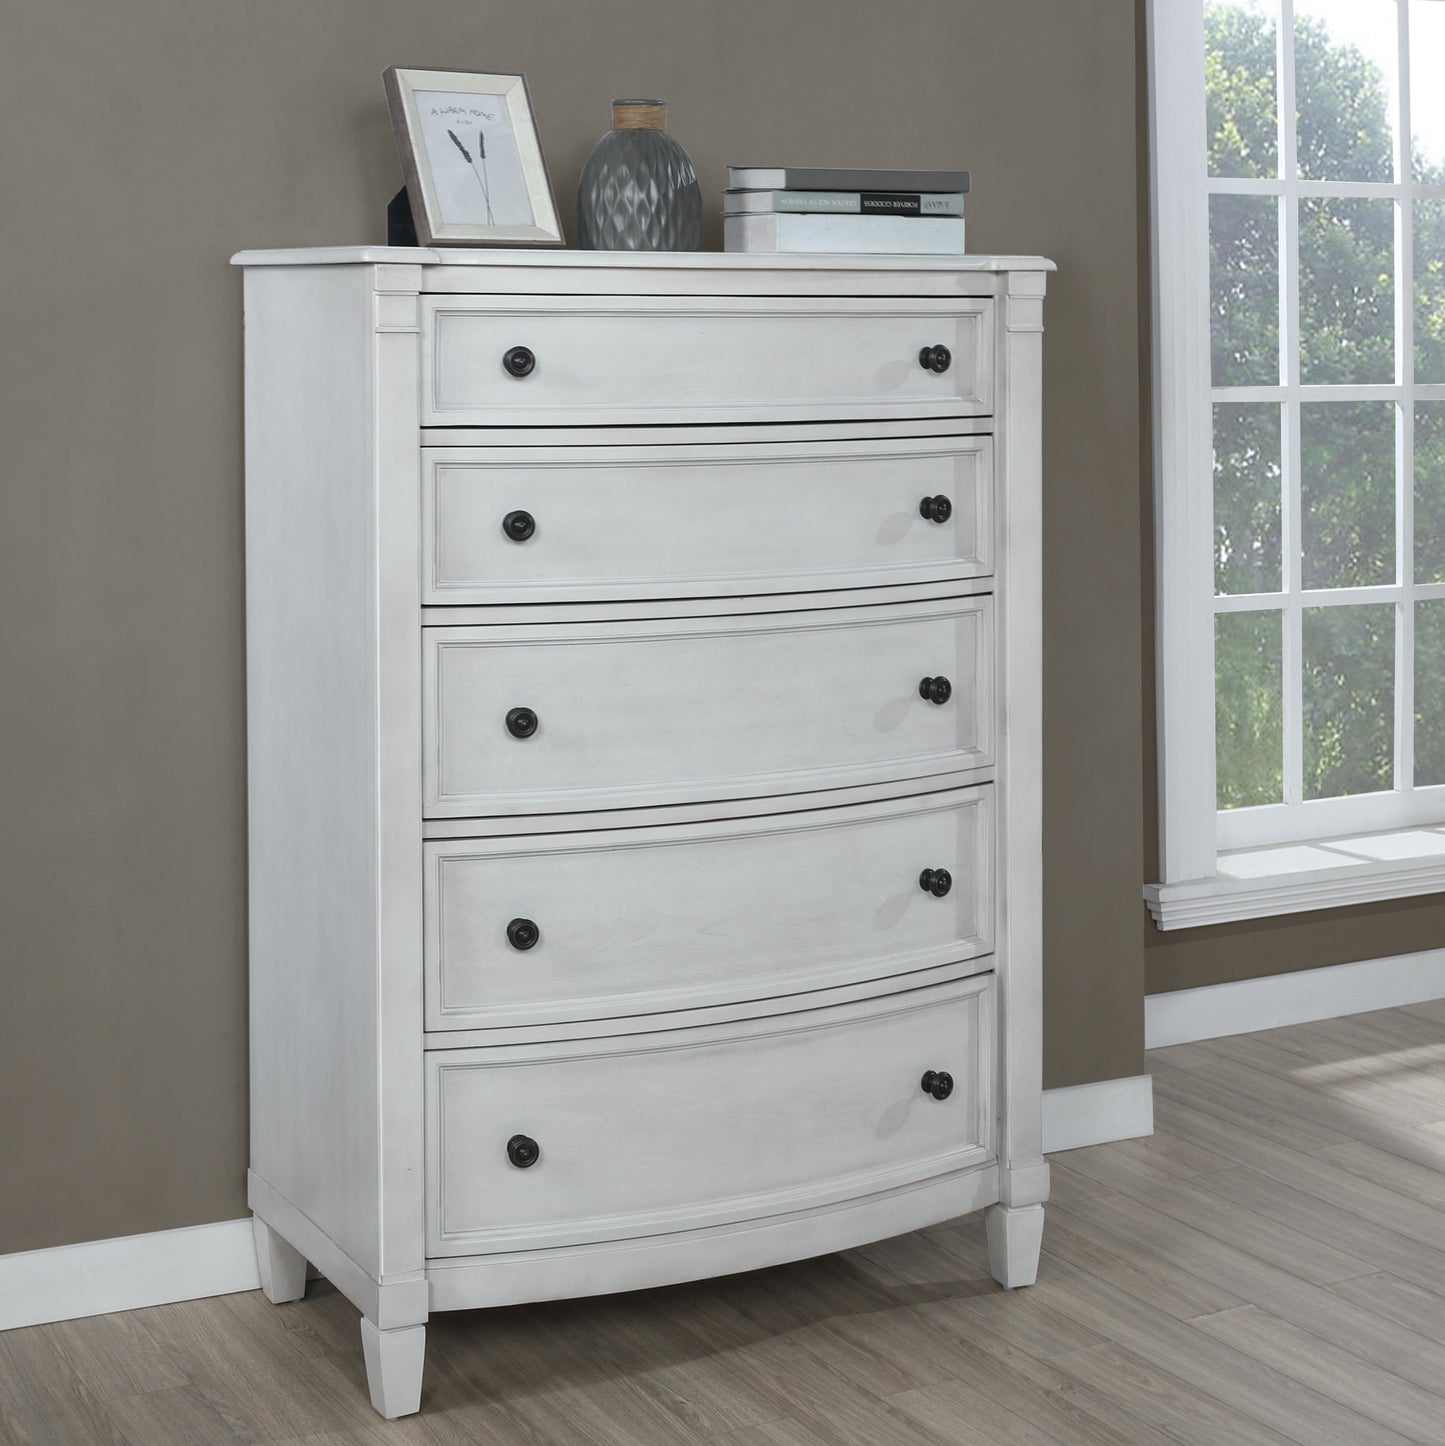 Saline Wood Camelback Bedroom Collection